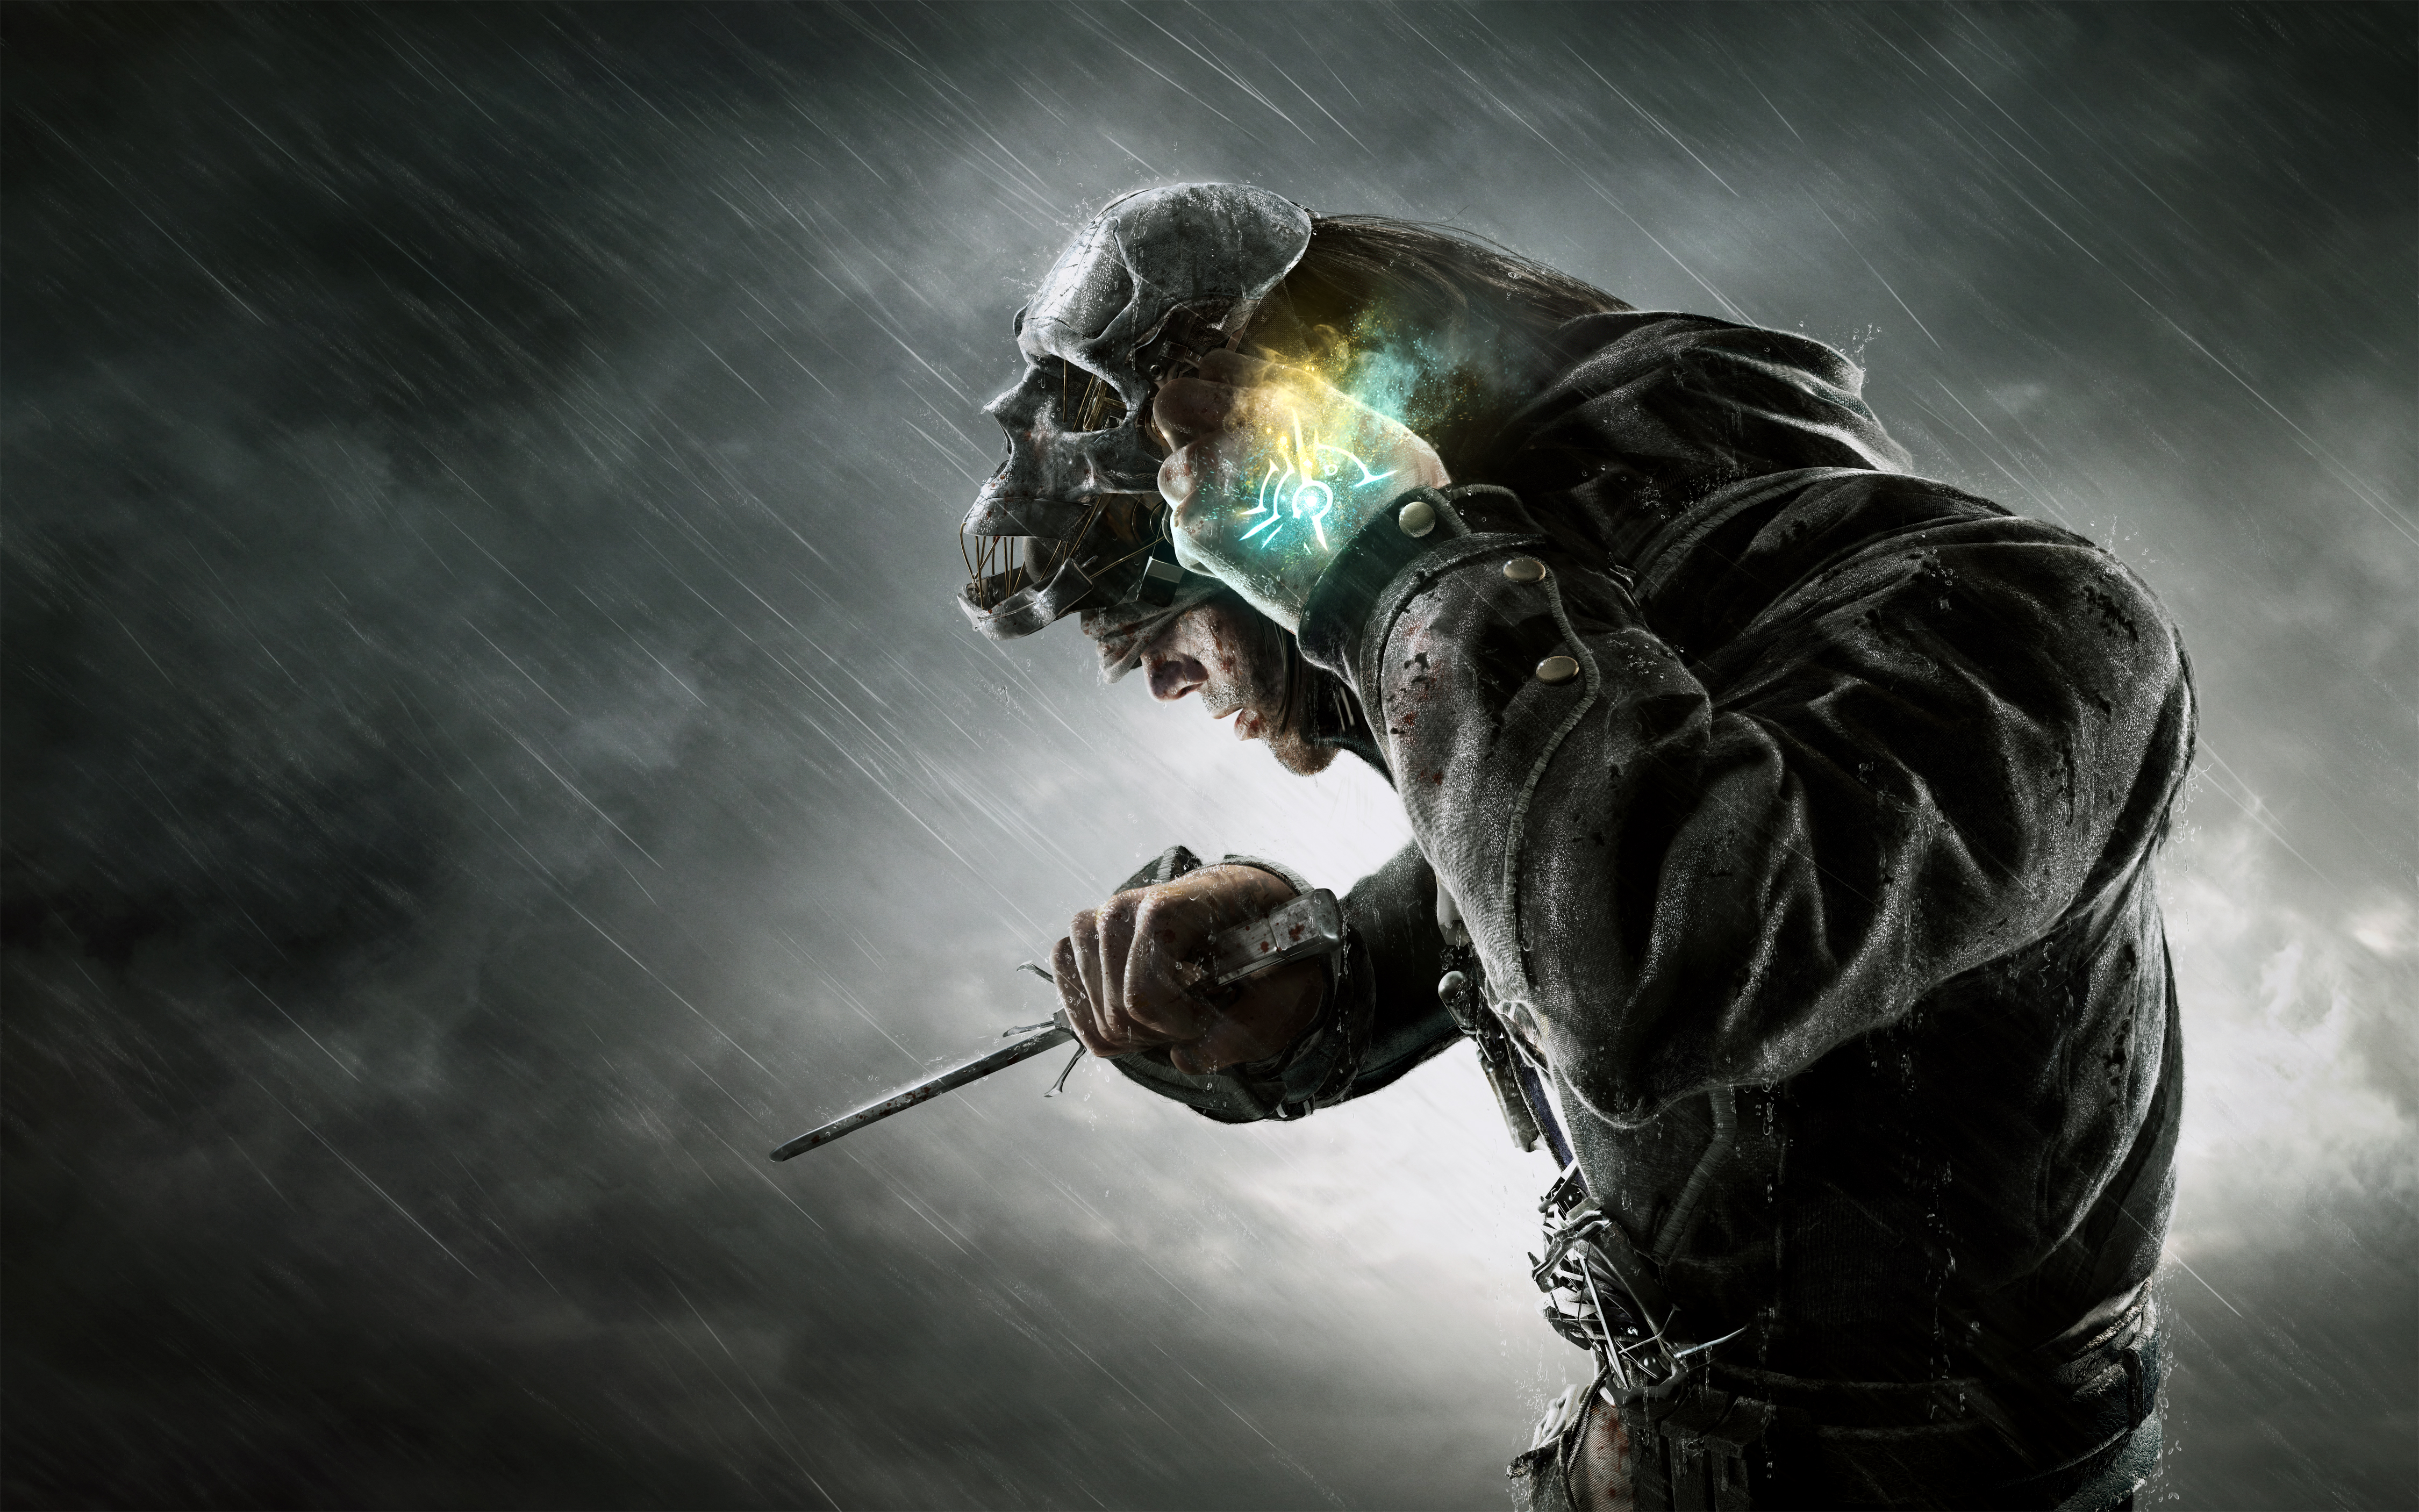 HQ Dishonored Wallpapers | File 7837.93Kb